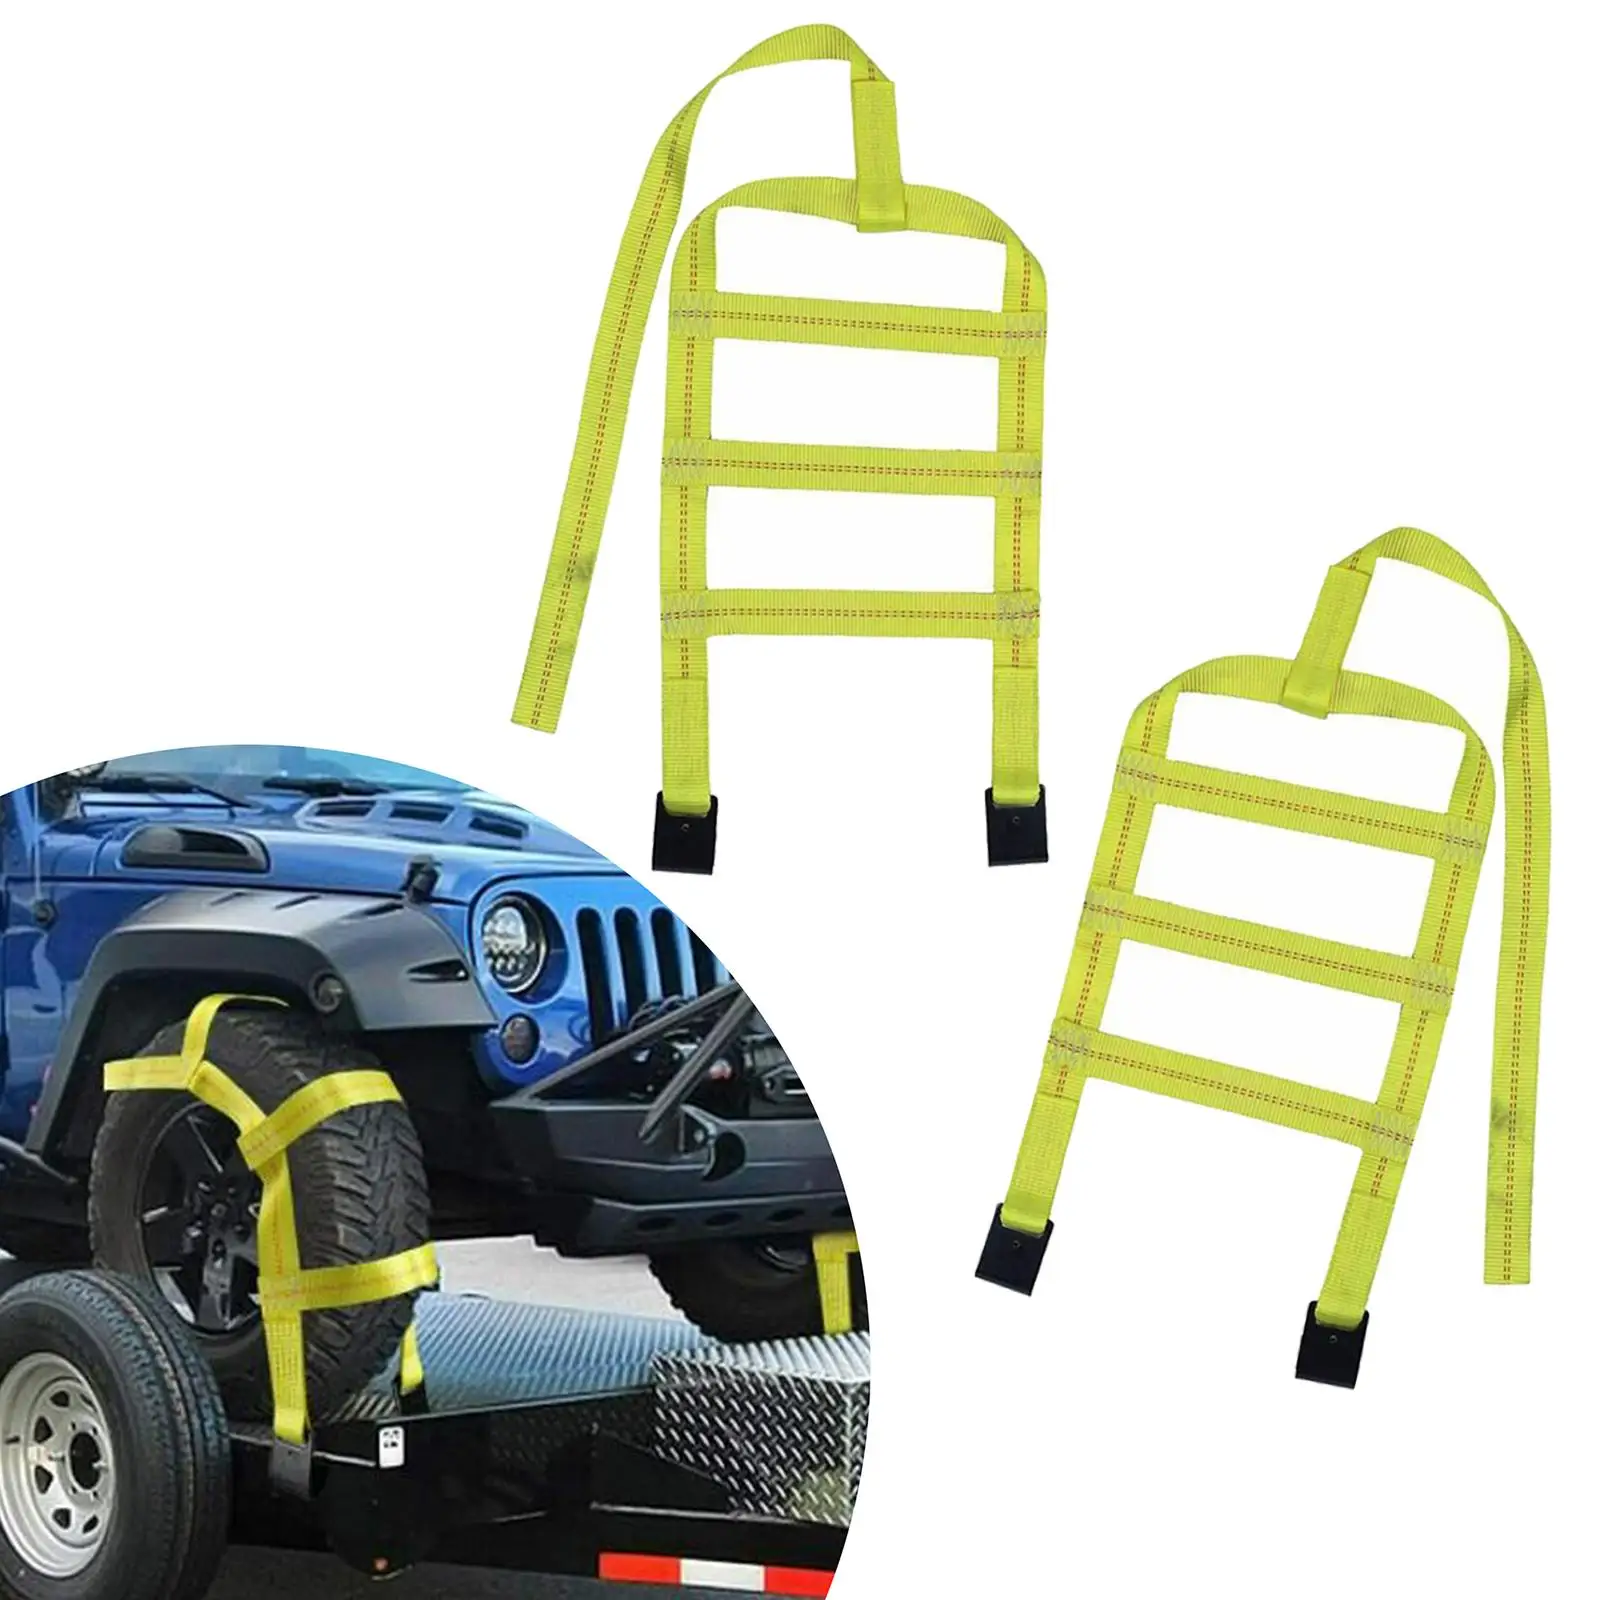 Tow Straps Basket Adjustable Fits for 14-17inch Tires